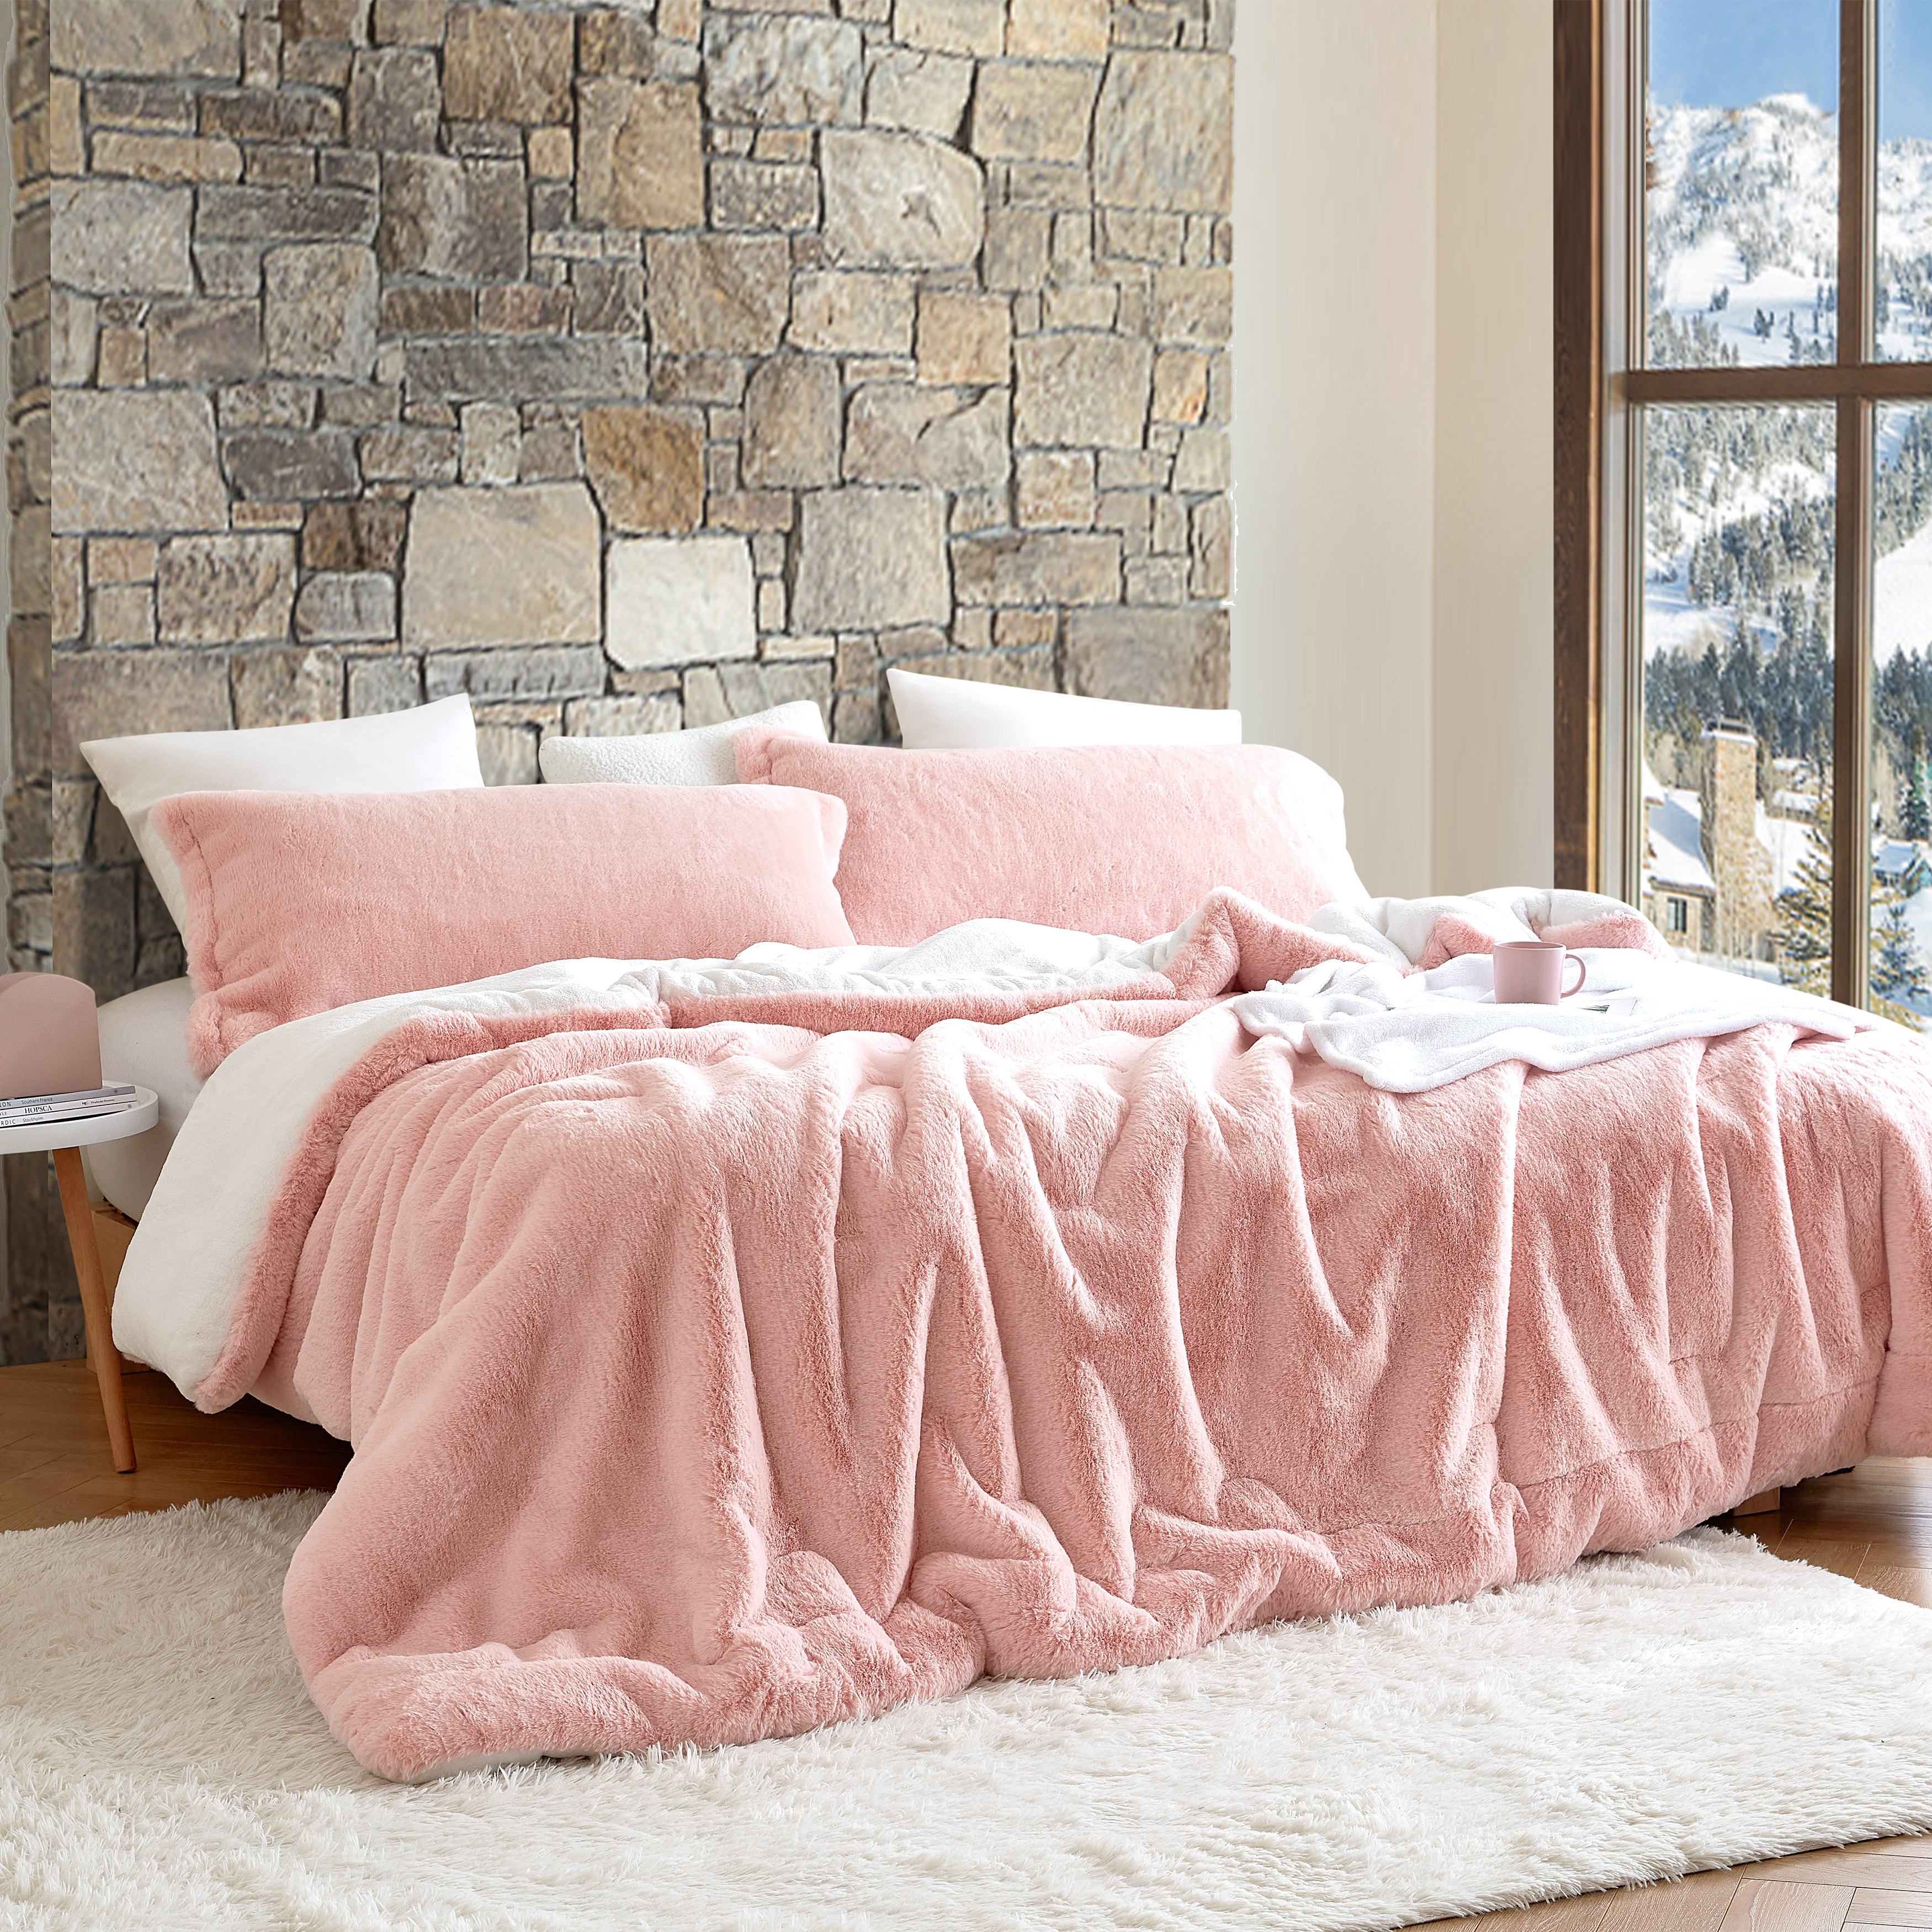 Chunky Bunny - Coma Inducer® Oversized Queen Comforter - Rose Quartz